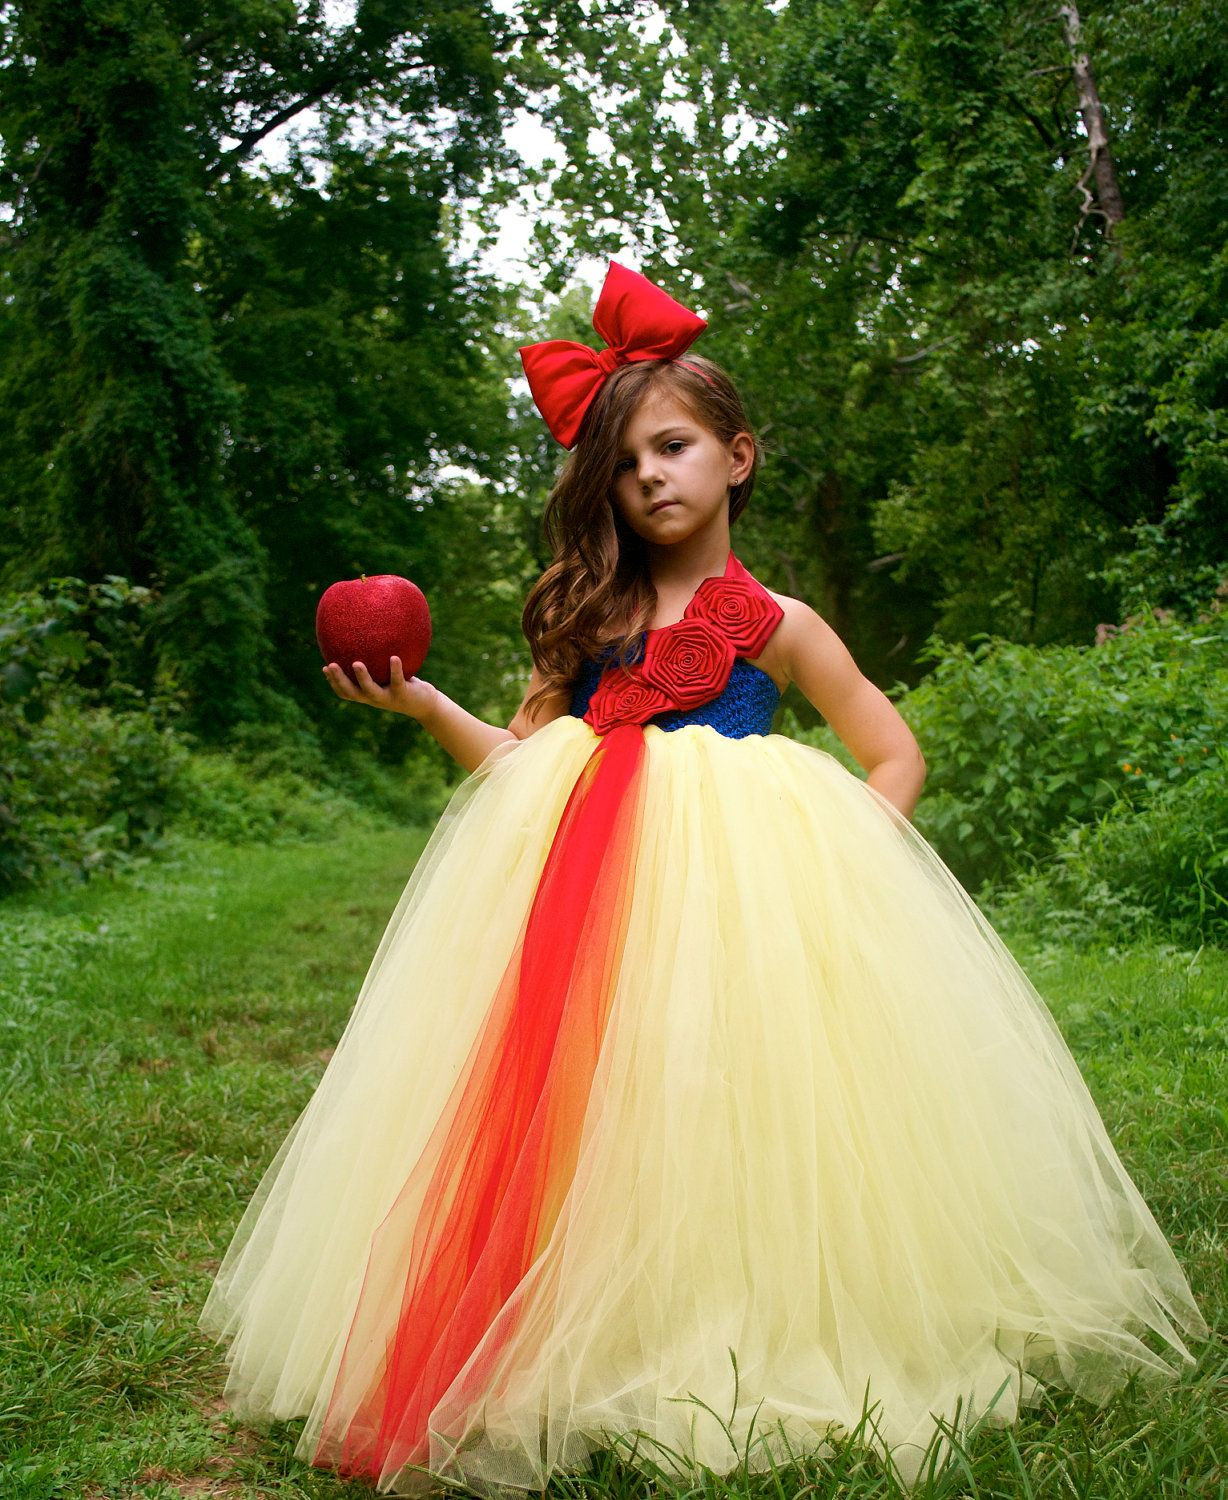 Best ideas about DIY Snow White Costume Toddler
. Save or Pin Best 25 Snow white costume ideas on Pinterest Now.